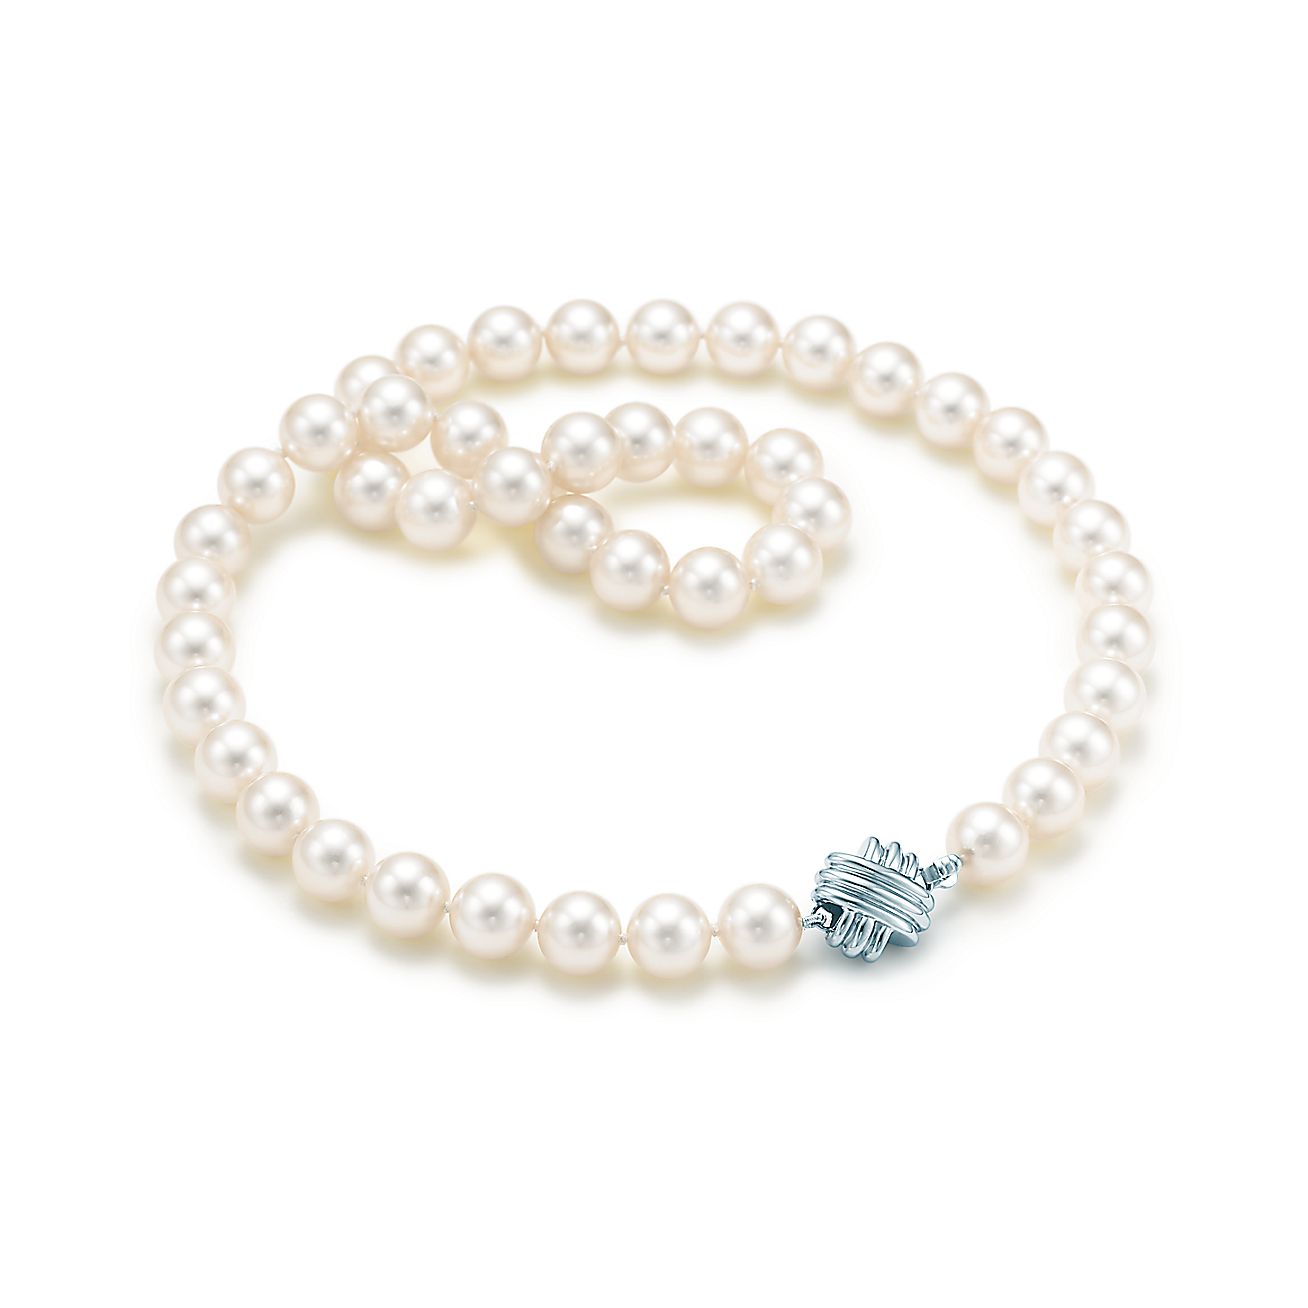 Tiffany Signature™ necklace of Akoya cultured pearls with 18k white ...